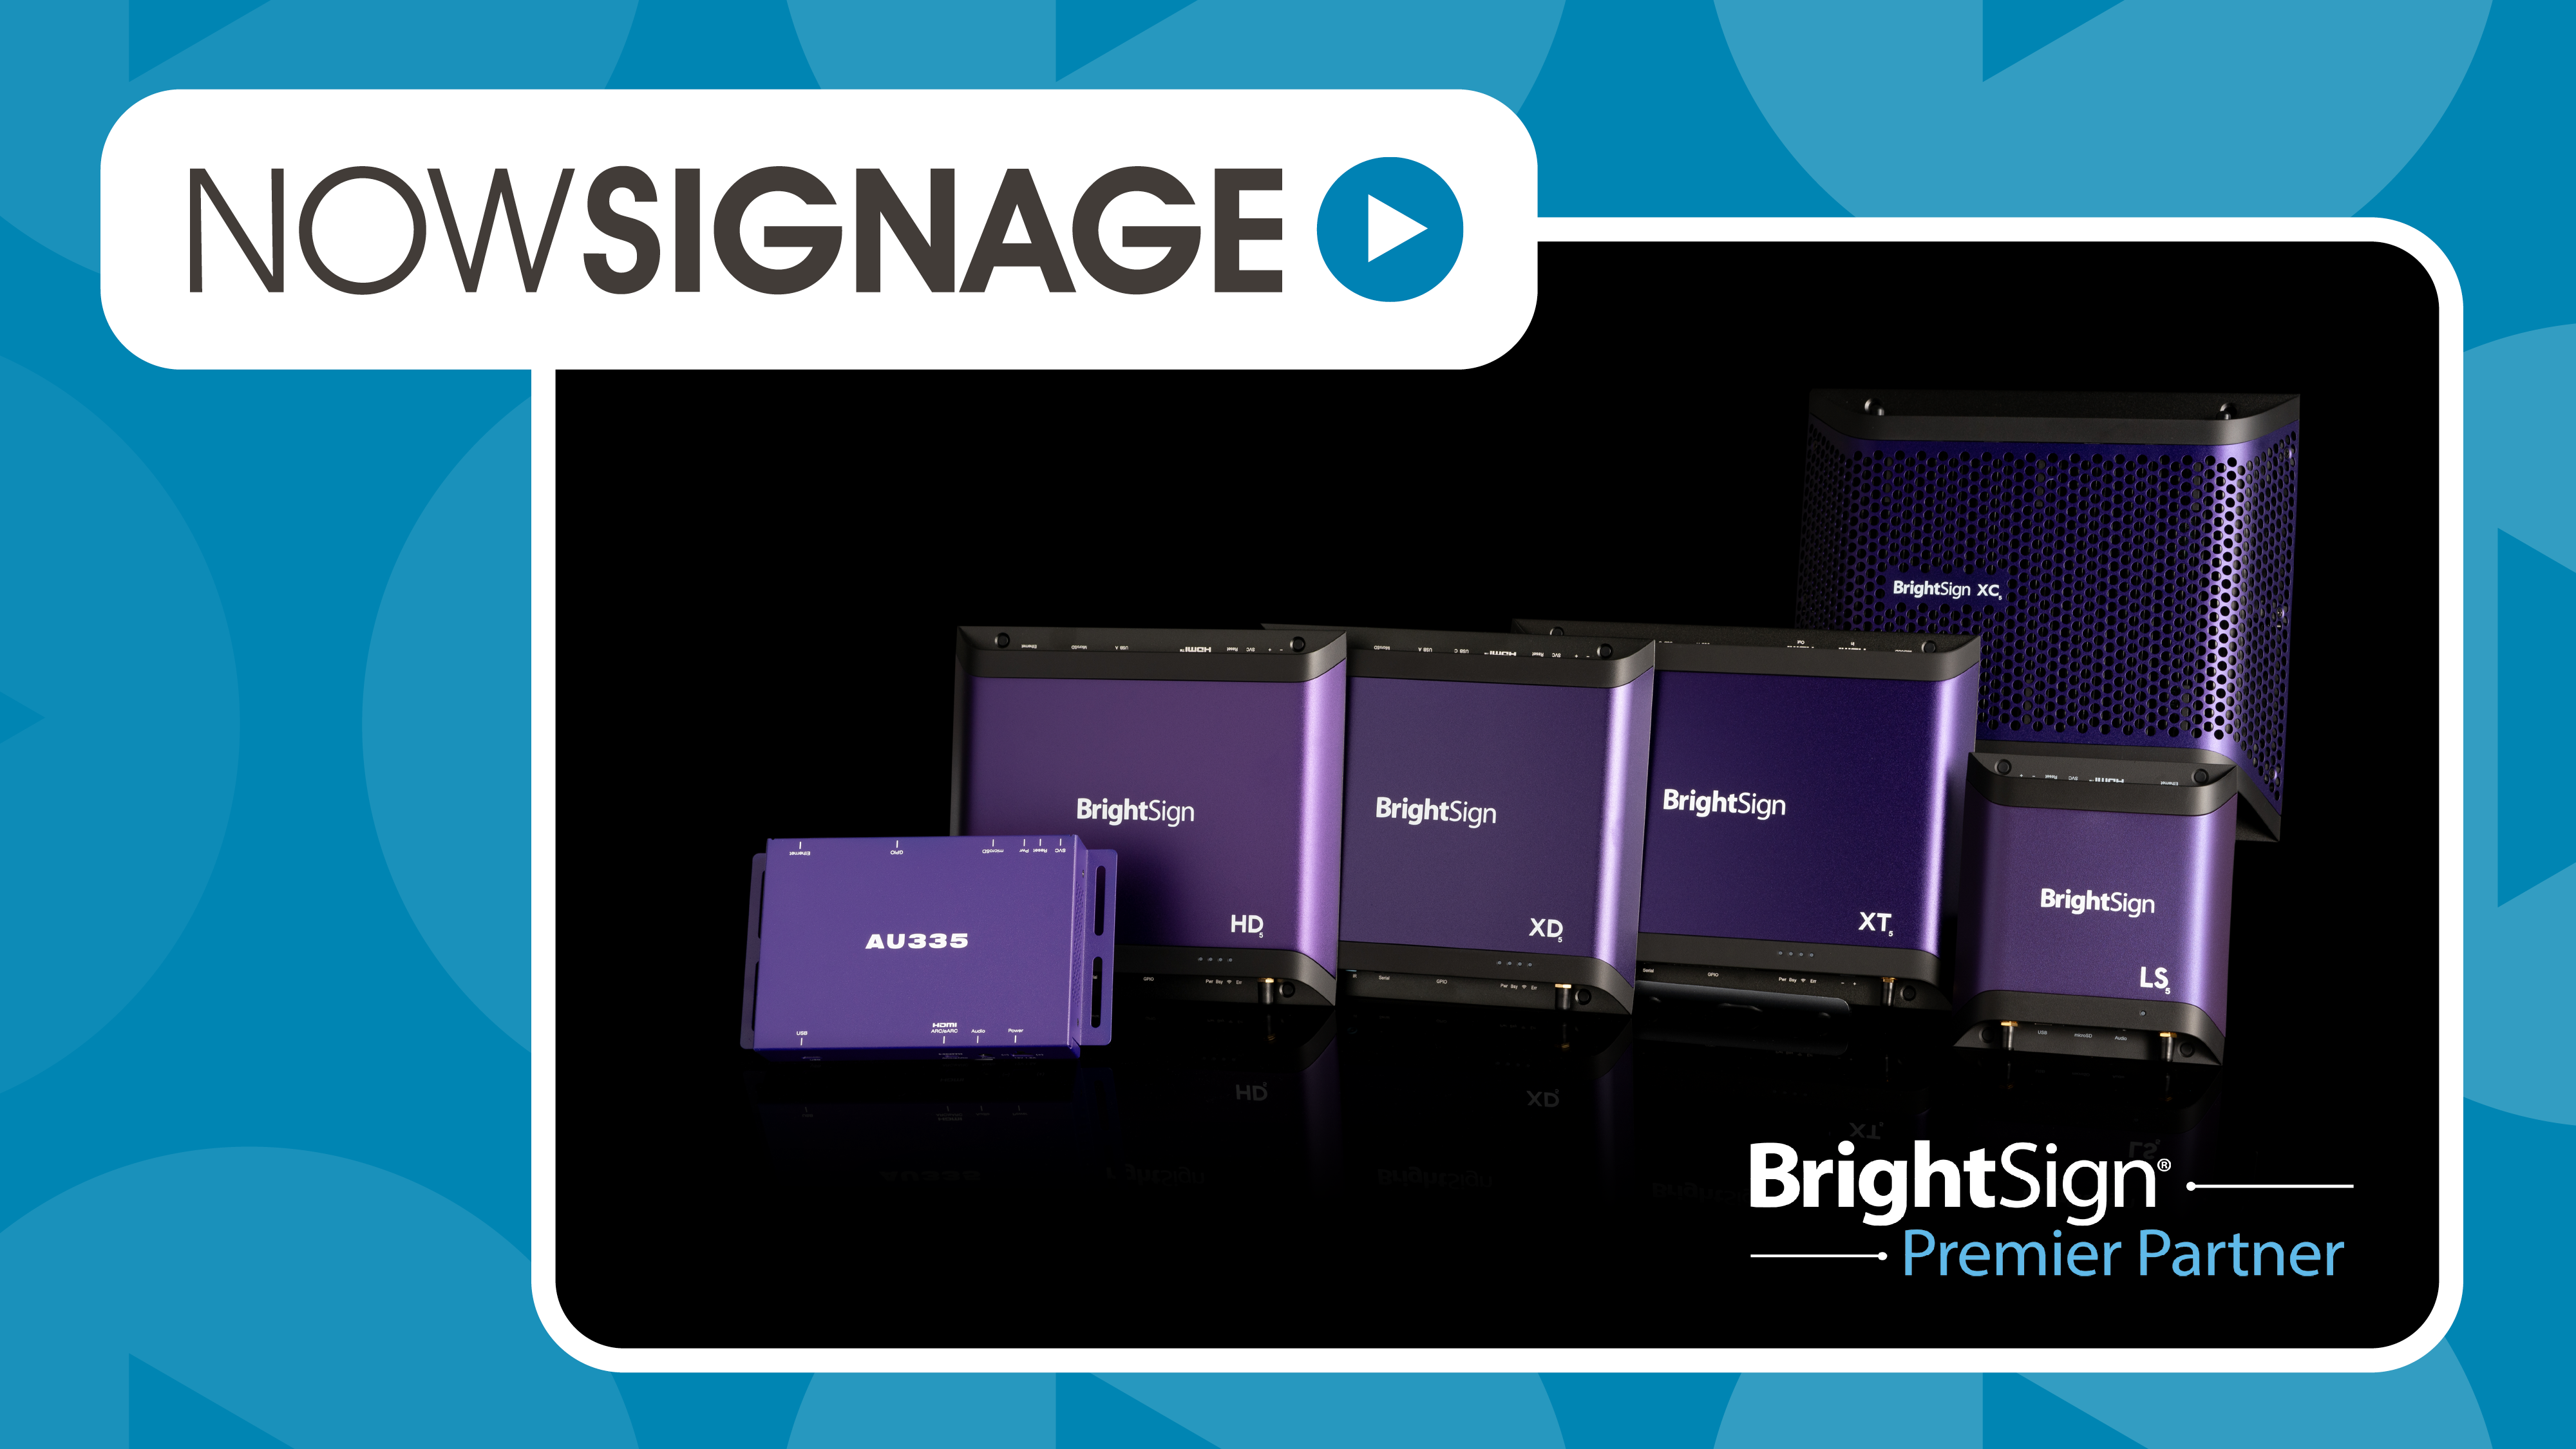 Bright Alliance Premier Partner, NowSignage, Launches Zero-Touch Provisioning on BrightSign